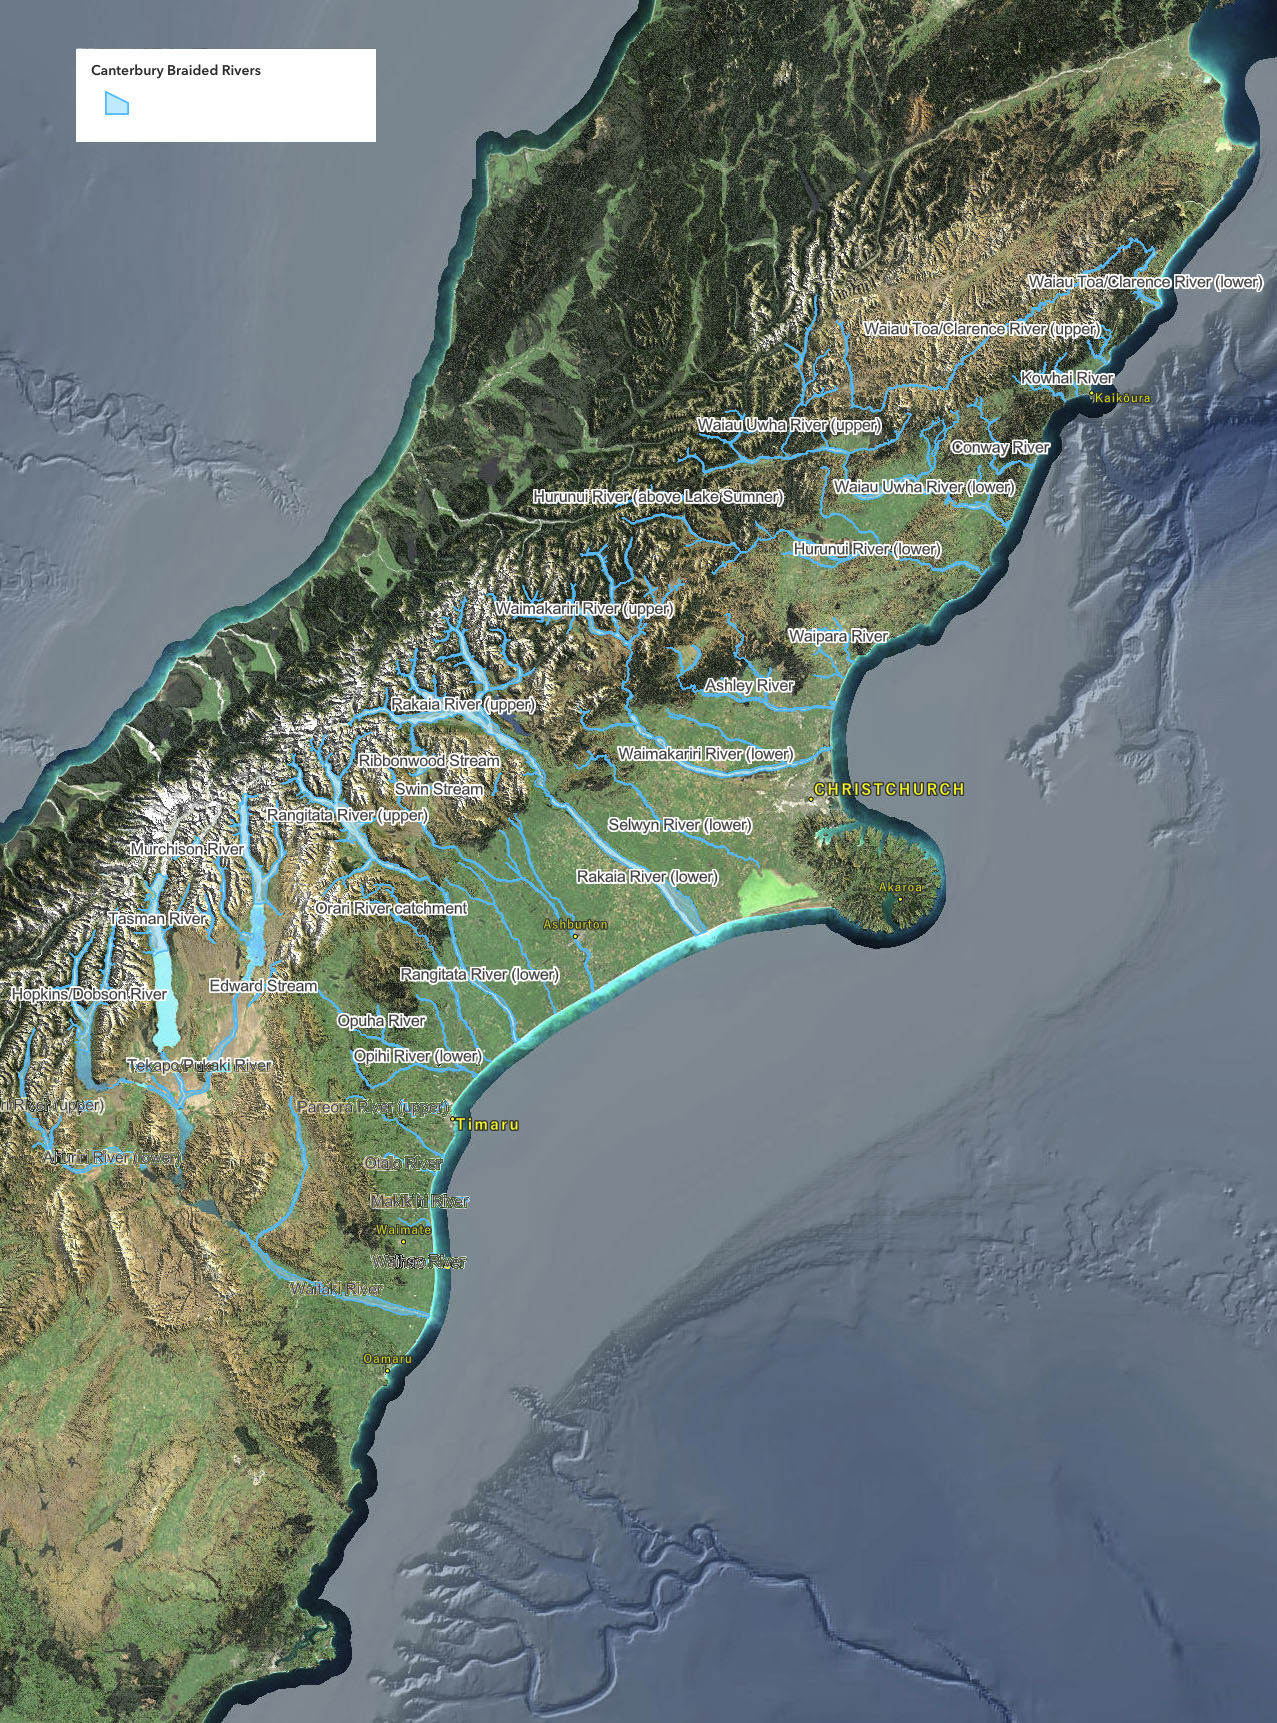 Click on the map to be taken to the interactive Arcgis page to explore Canterbury's braided rivers.